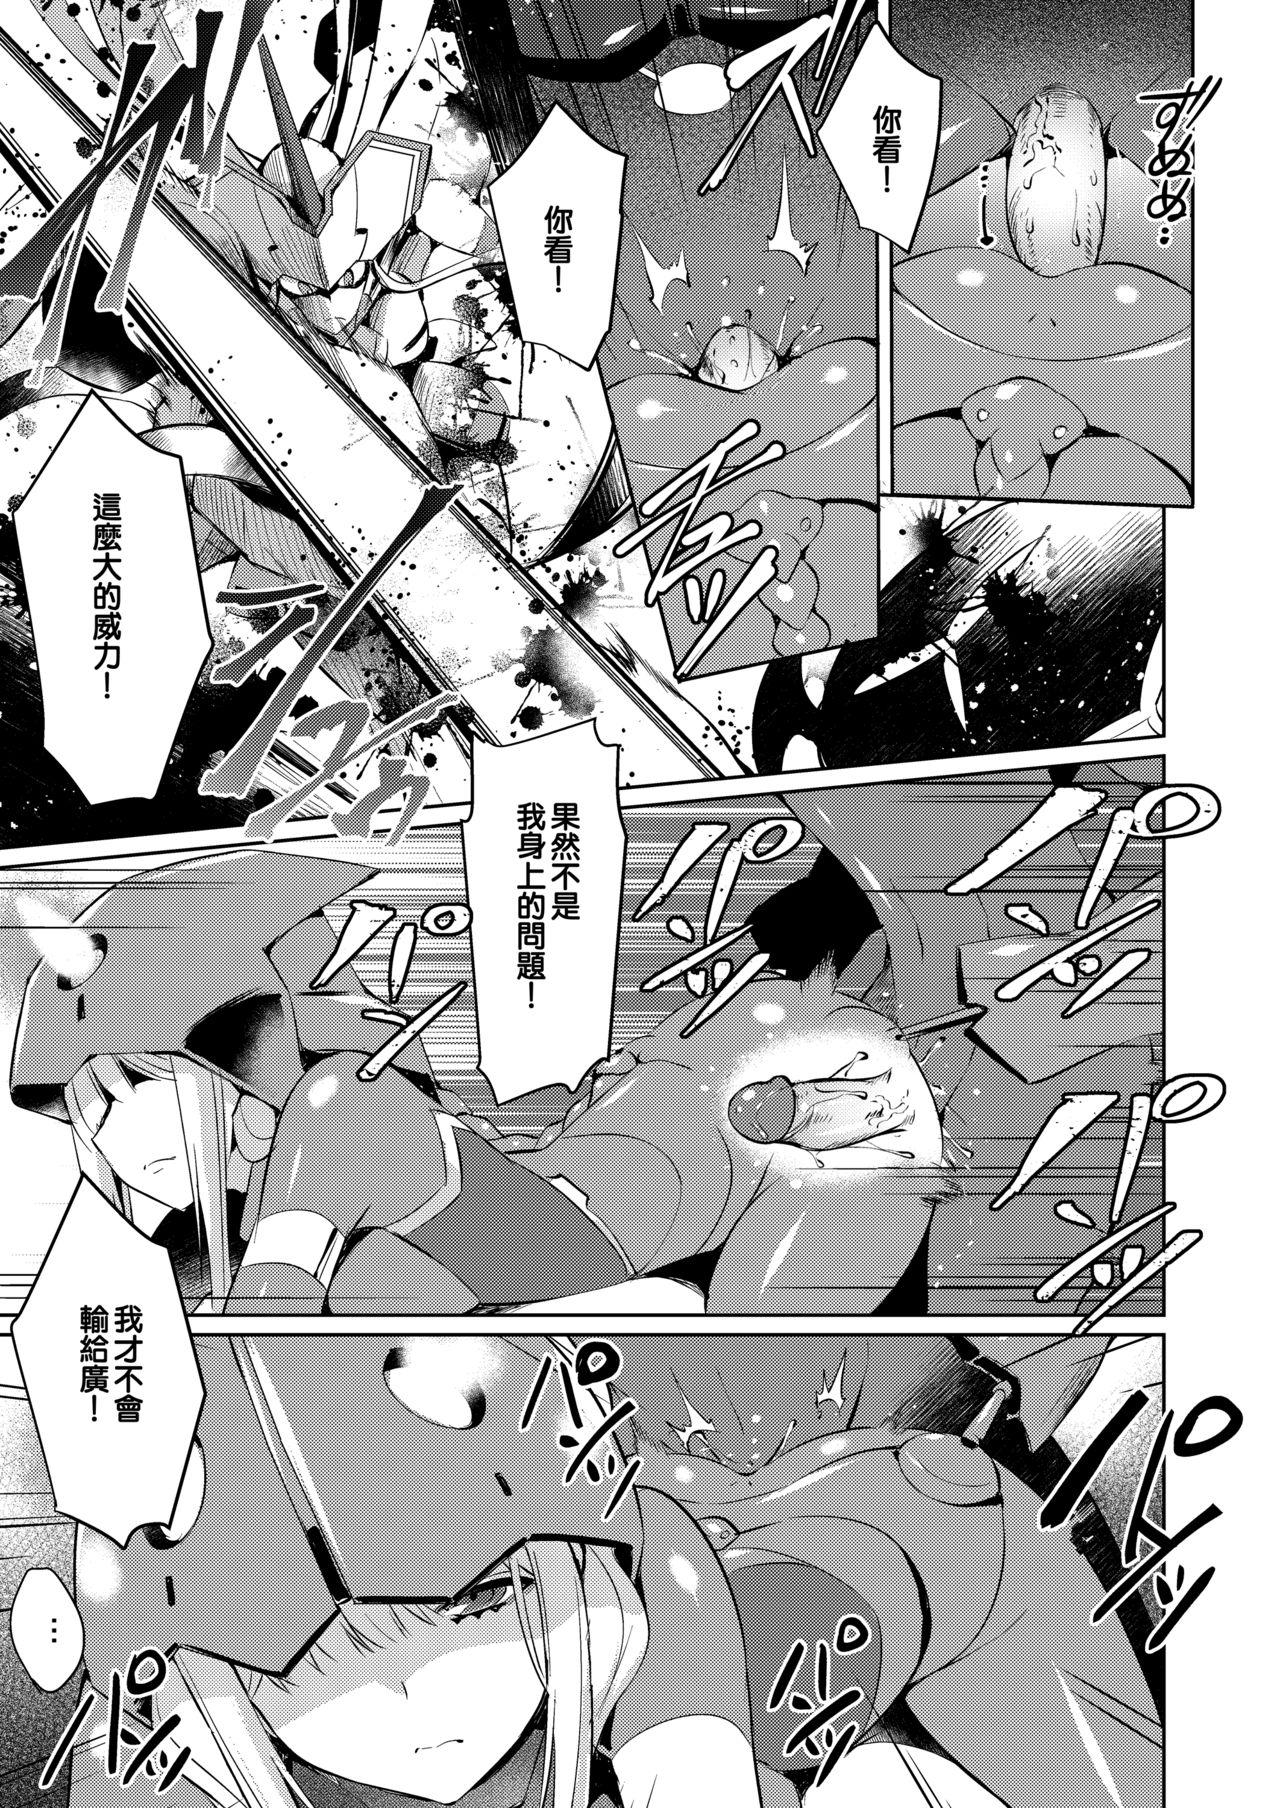 Pegging Mitsuru in the Zero Two - Darling in the franxx Amateur - Page 8